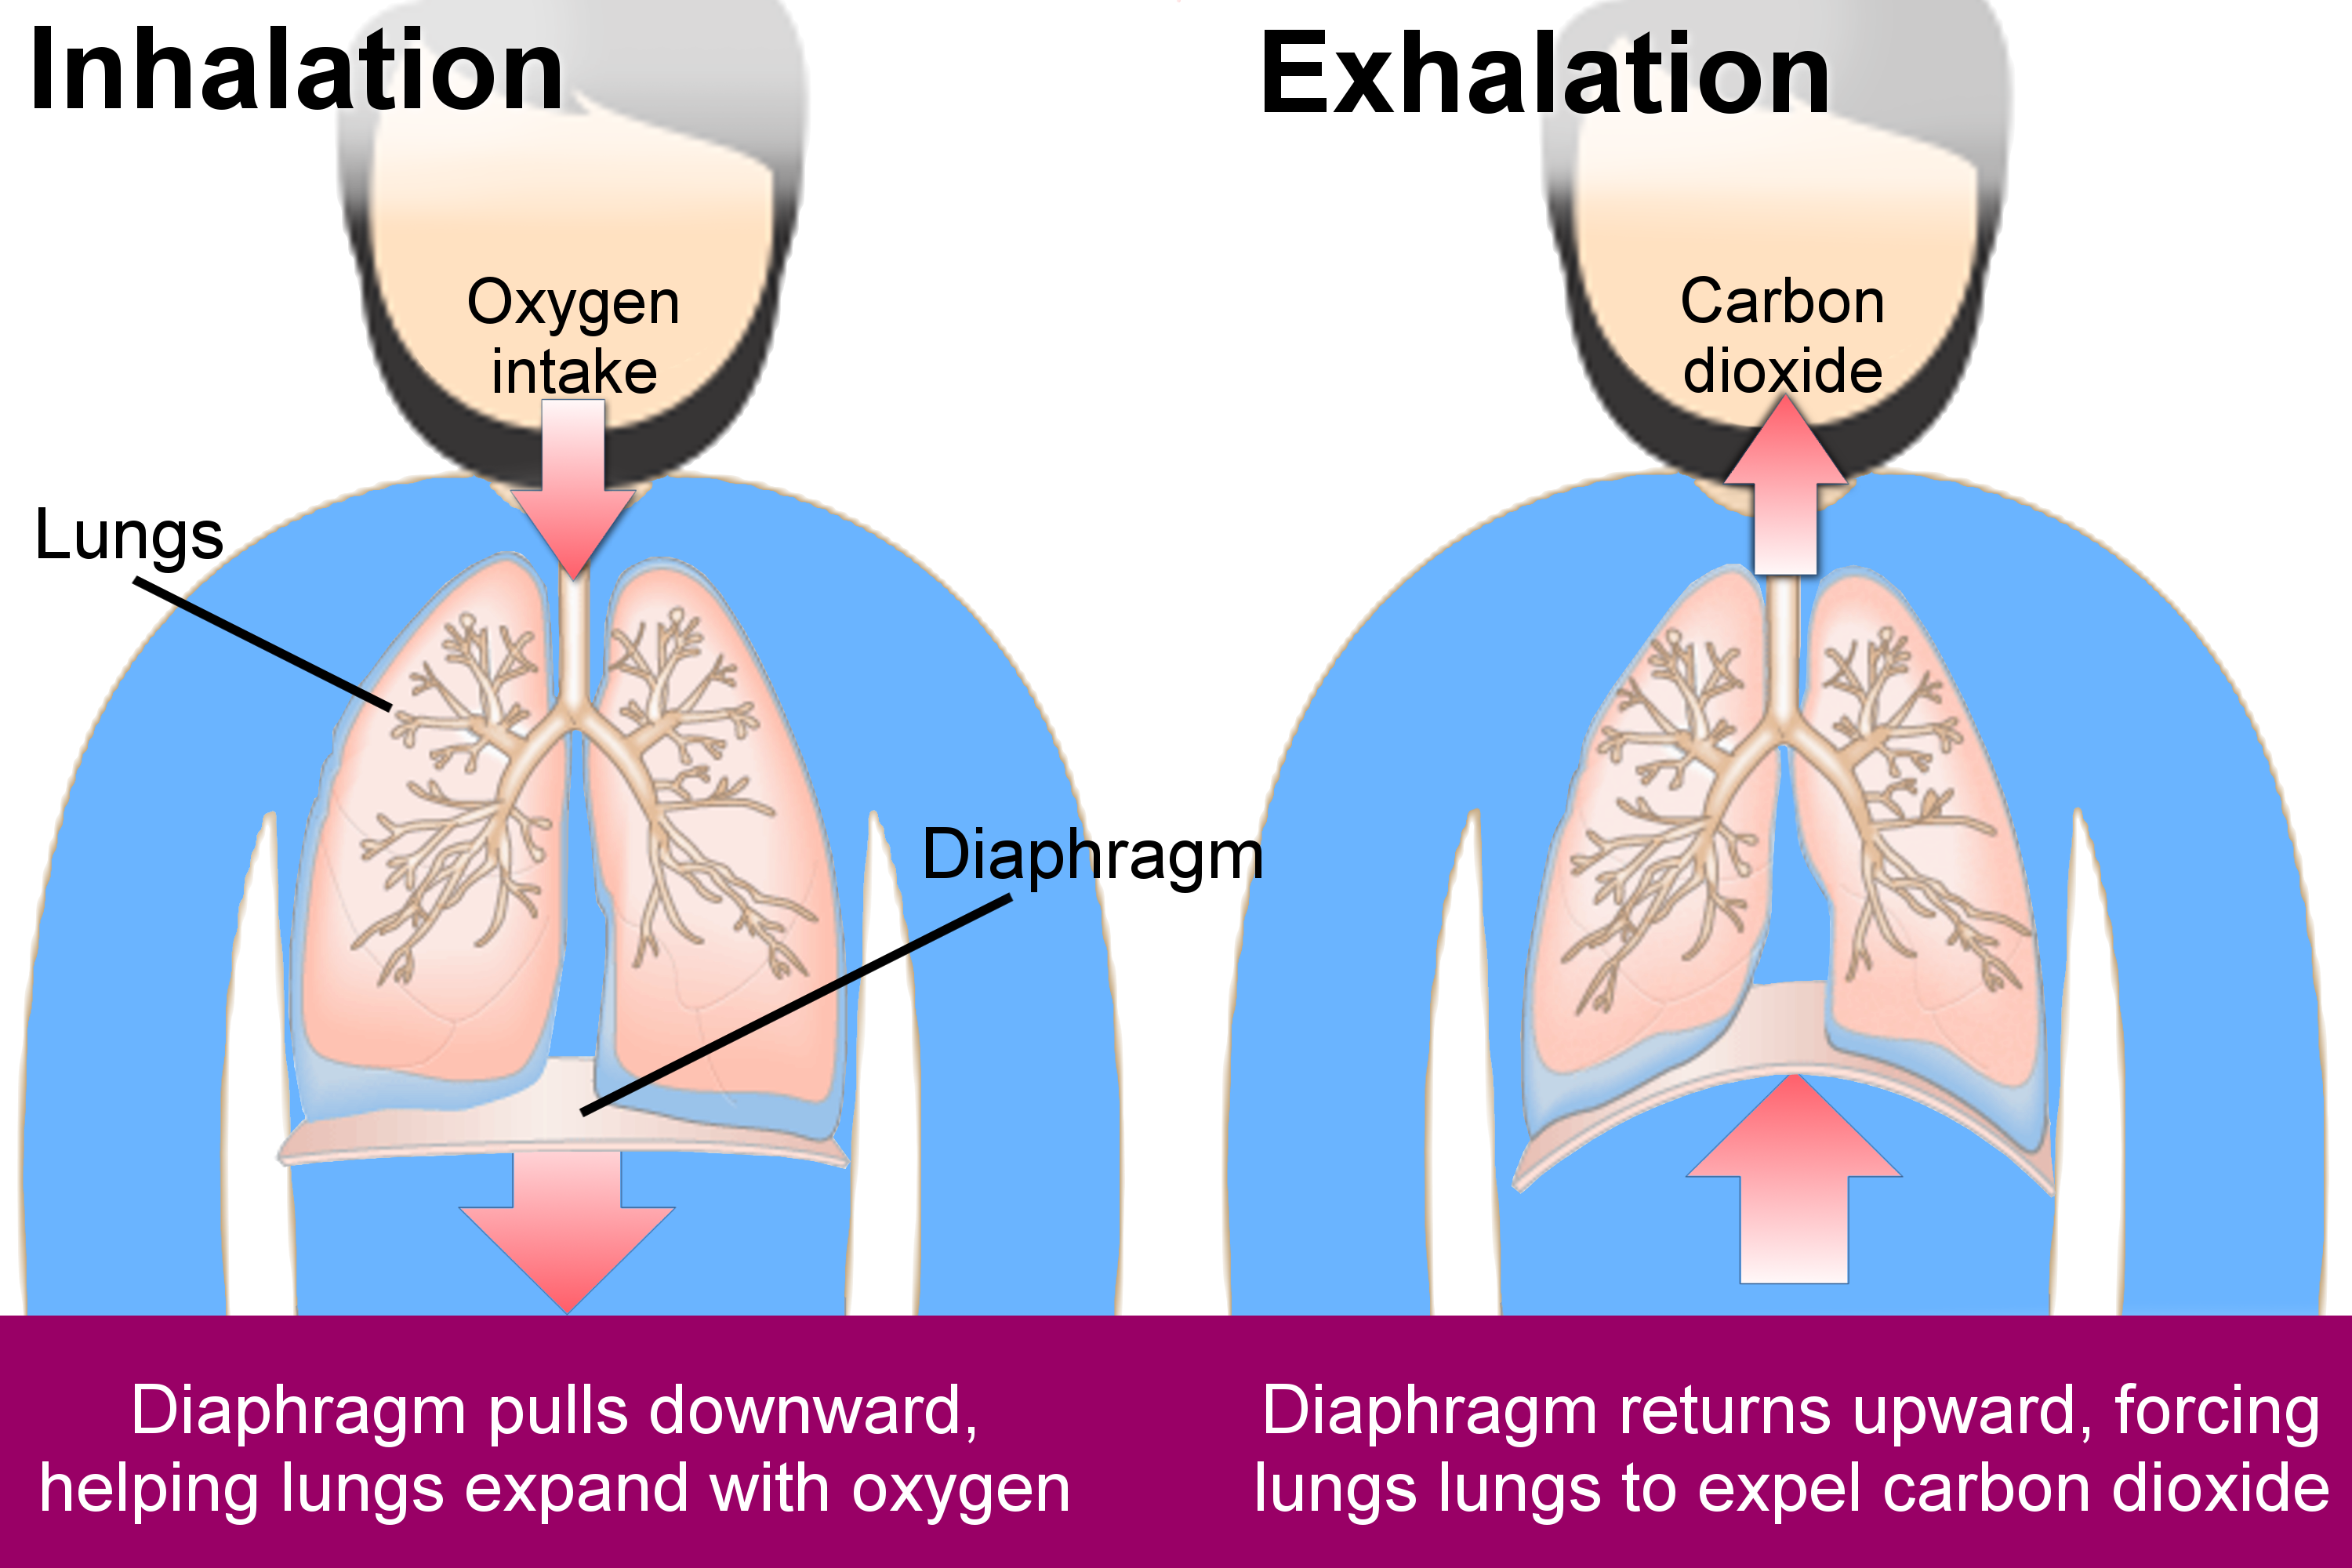 Does deep breathing improve lung function?